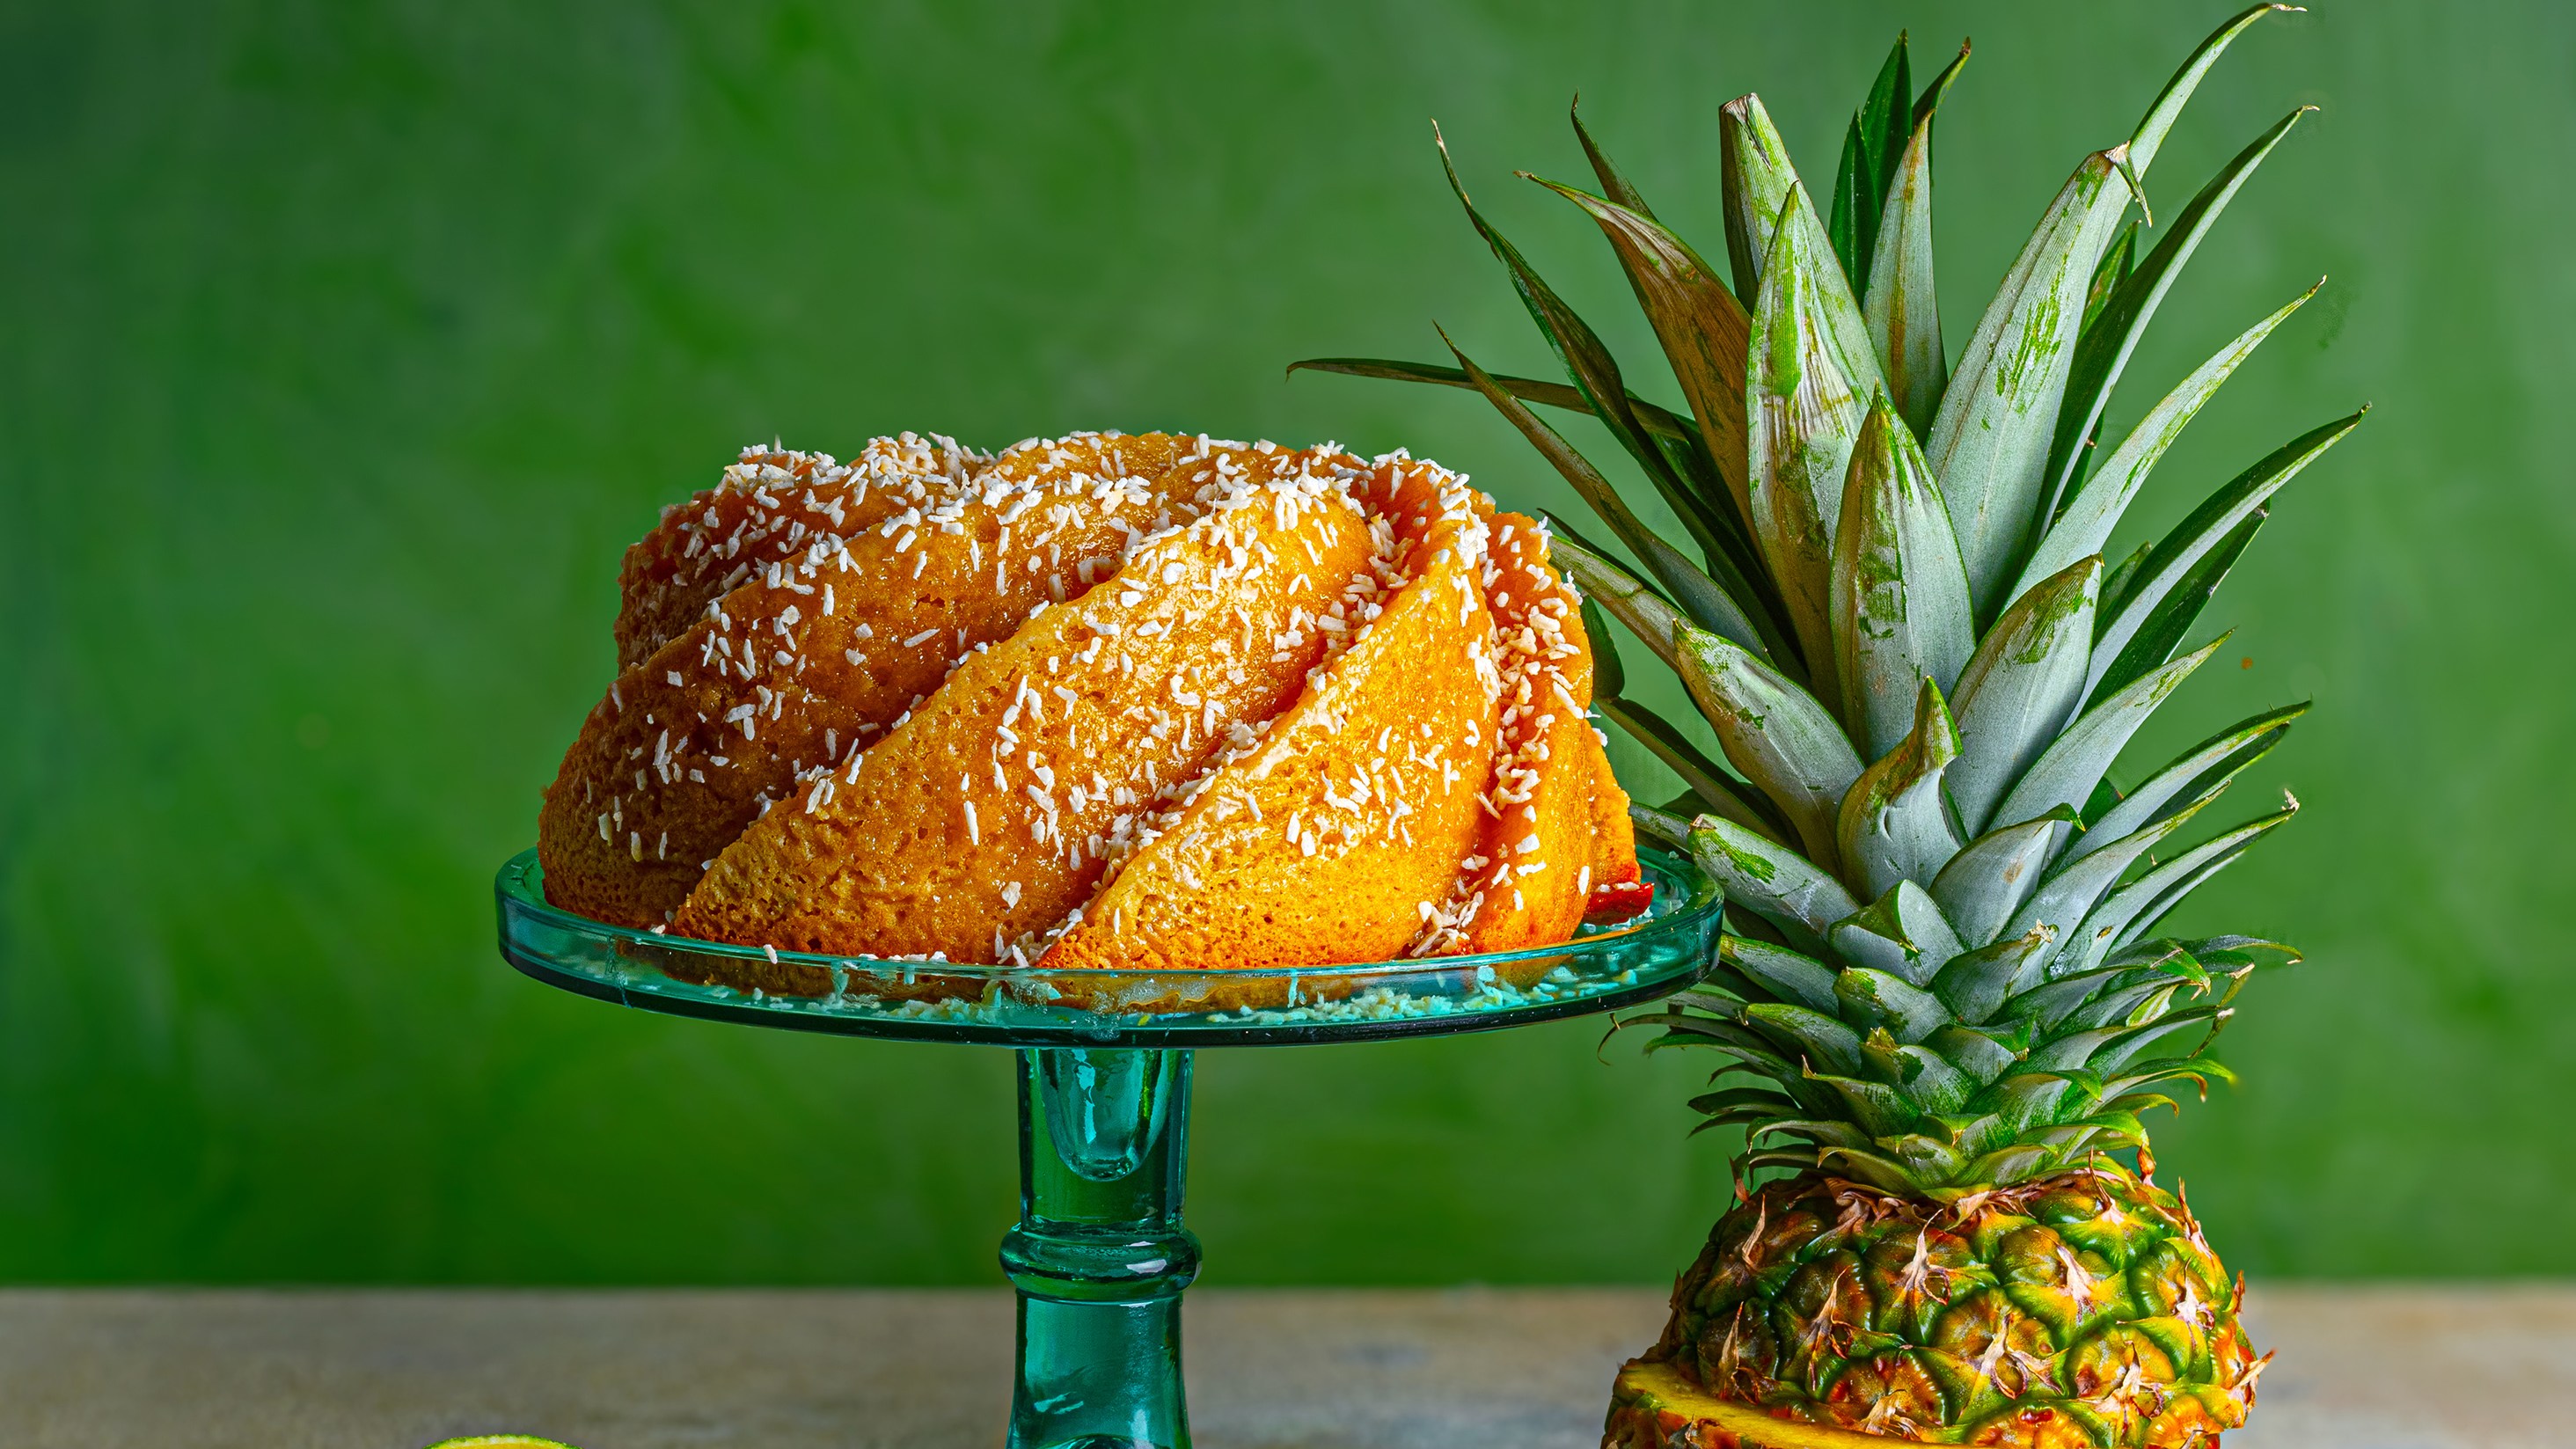 Nadiya Hussain’s pineapple bundt cake: “If anything is going to make you want to book your summer holidays early, this is it”